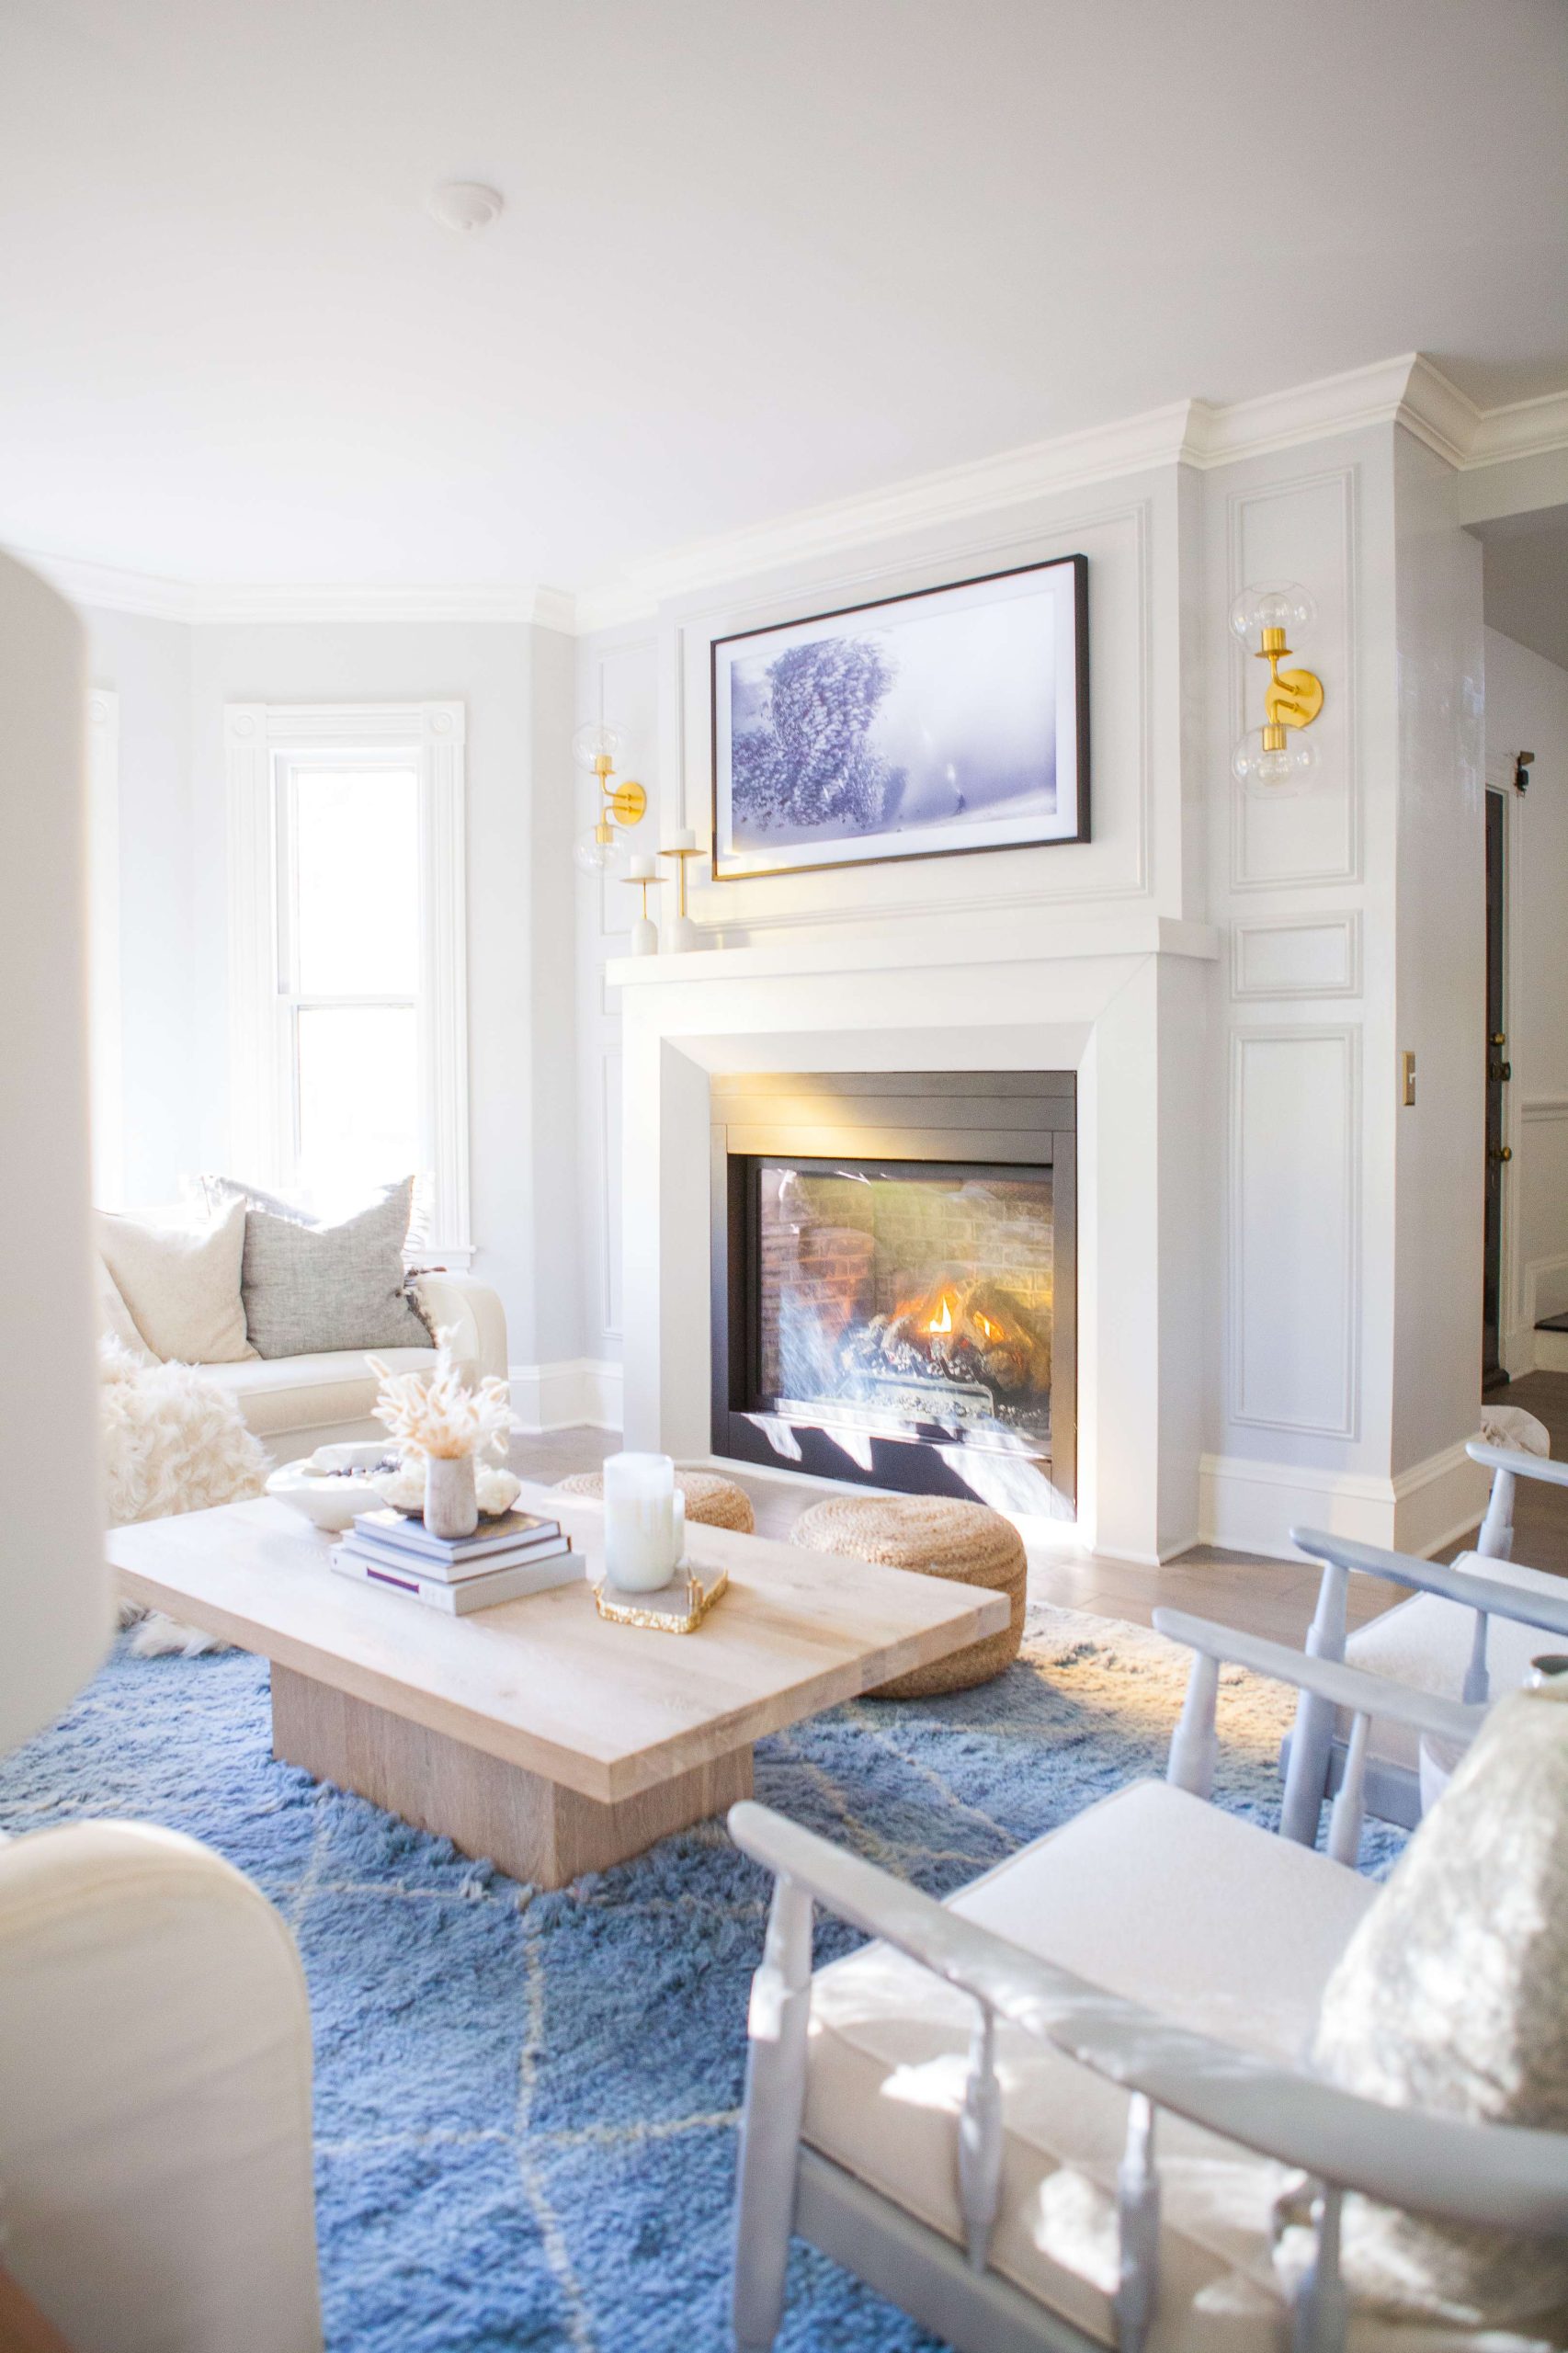 Home design inspiration: A gas fireplace transforms a little used